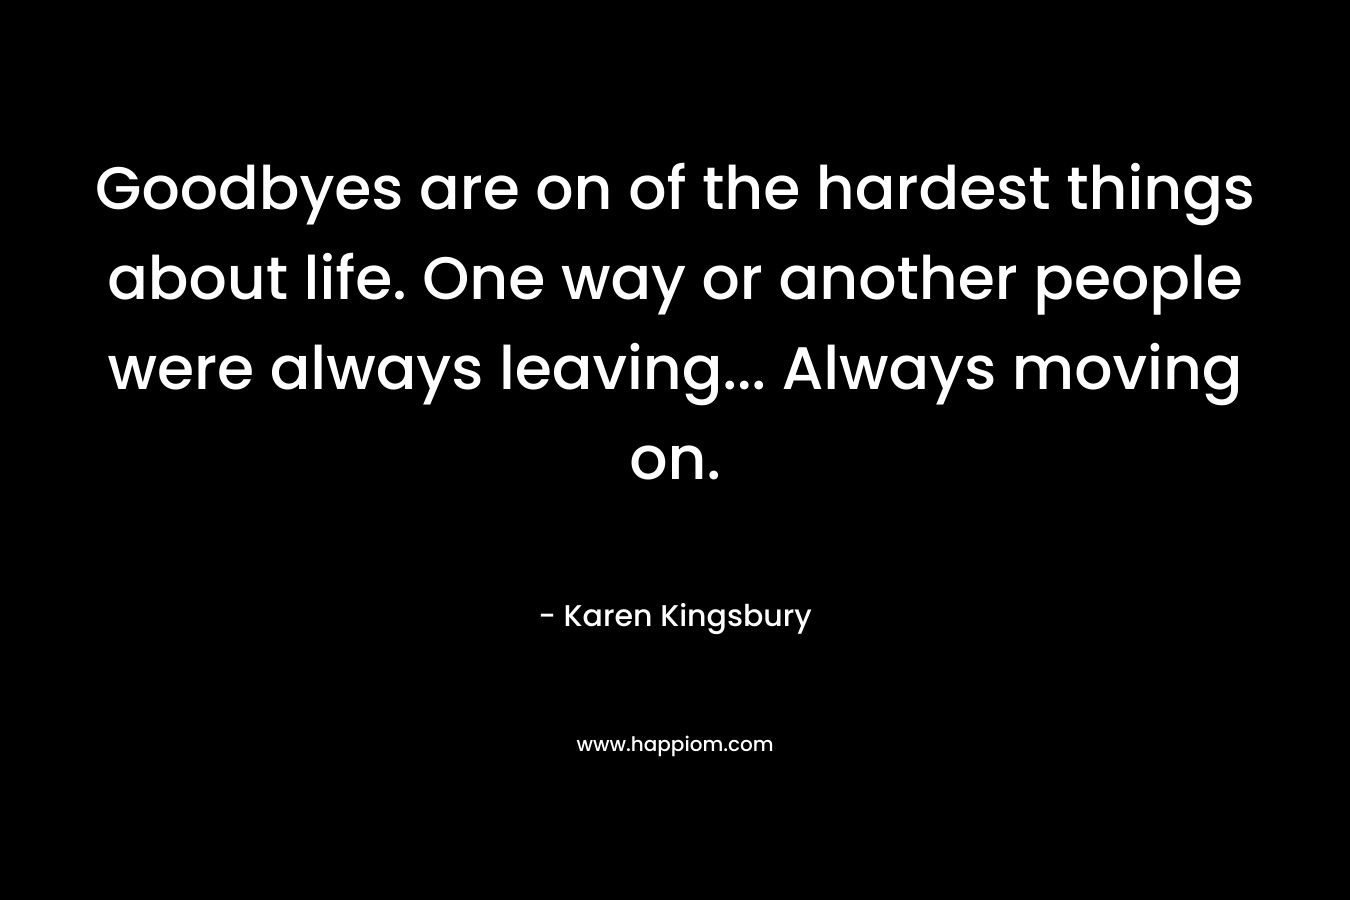 Goodbyes are on of the hardest things about life. One way or another people were always leaving… Always moving on. – Karen Kingsbury